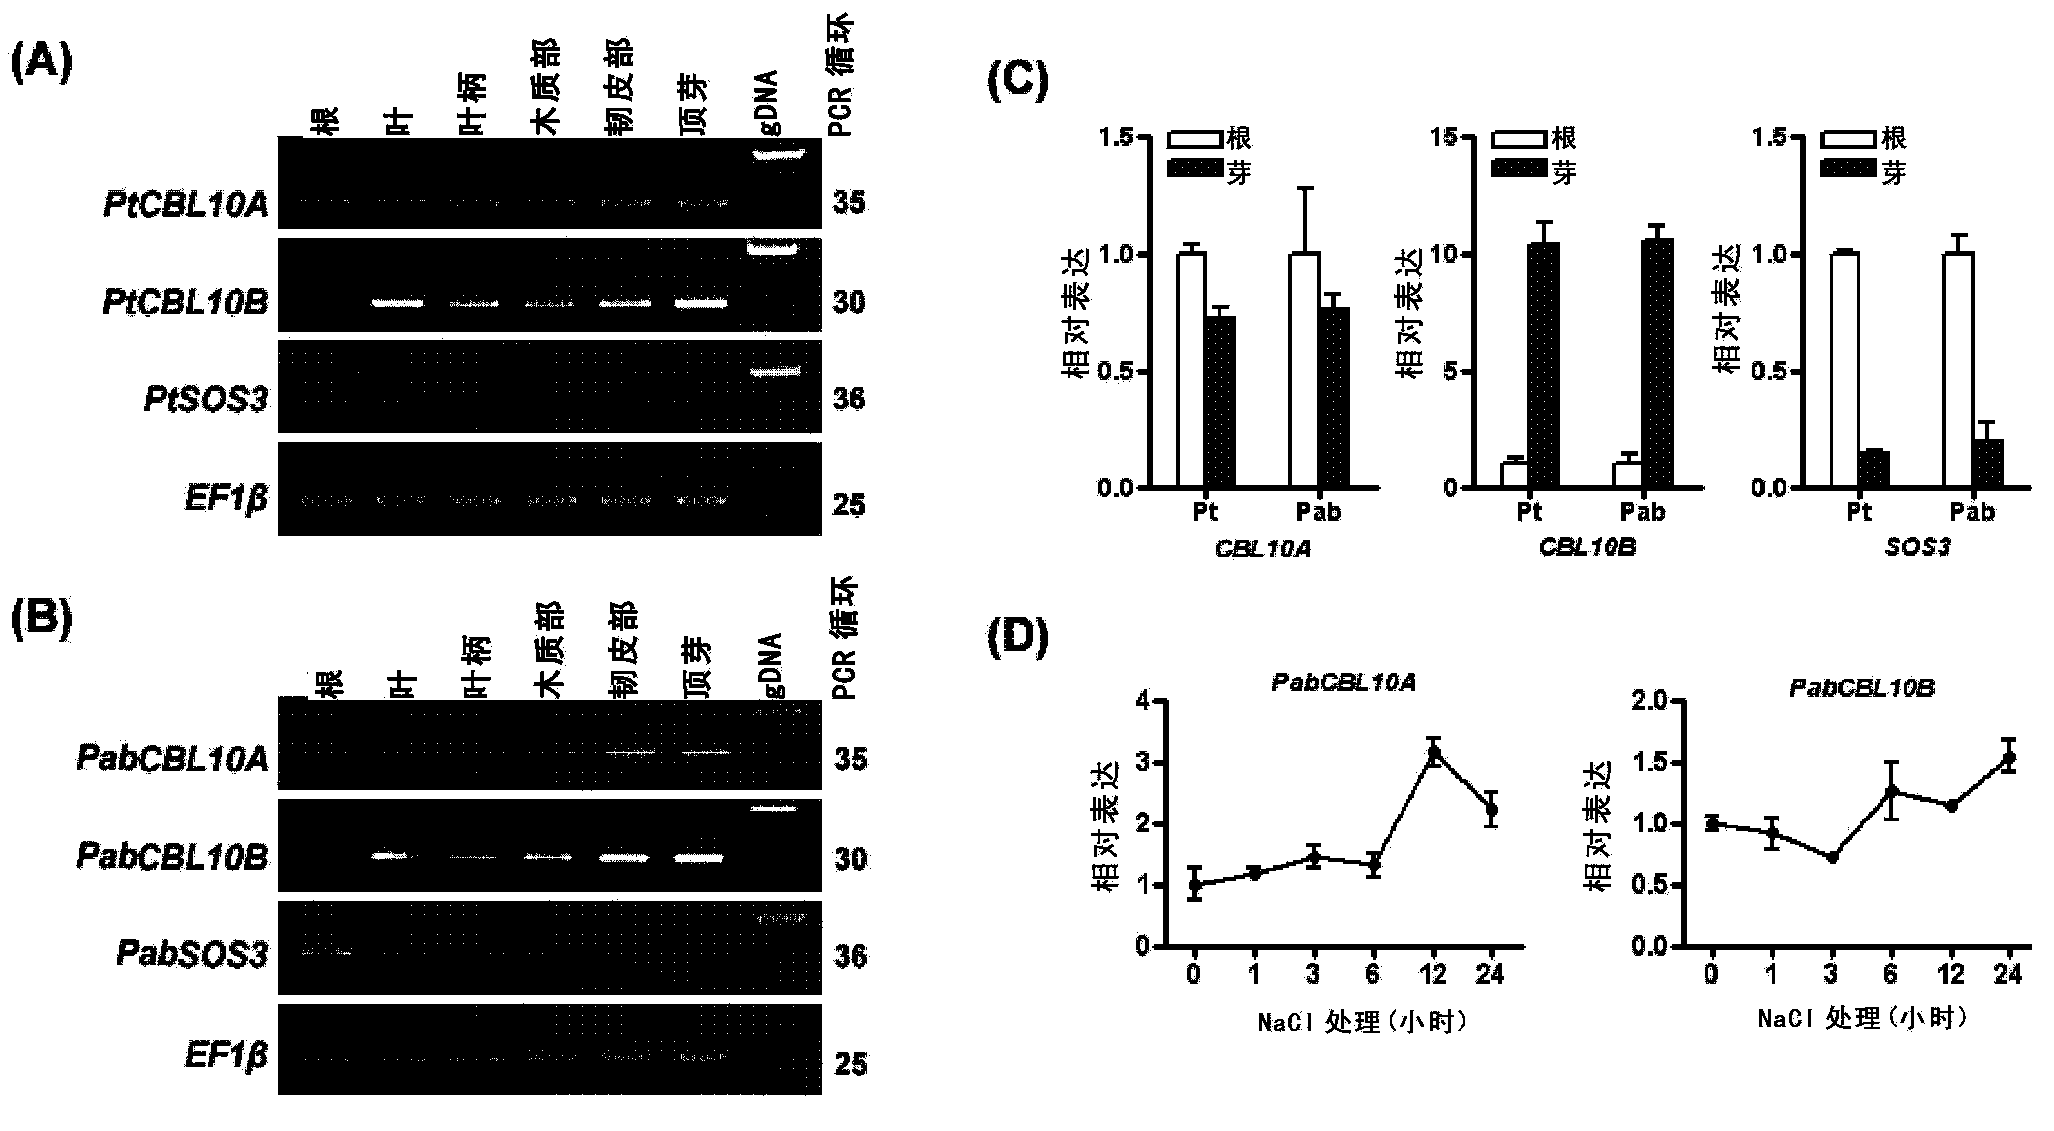 Method for improving adversity resistance of plants